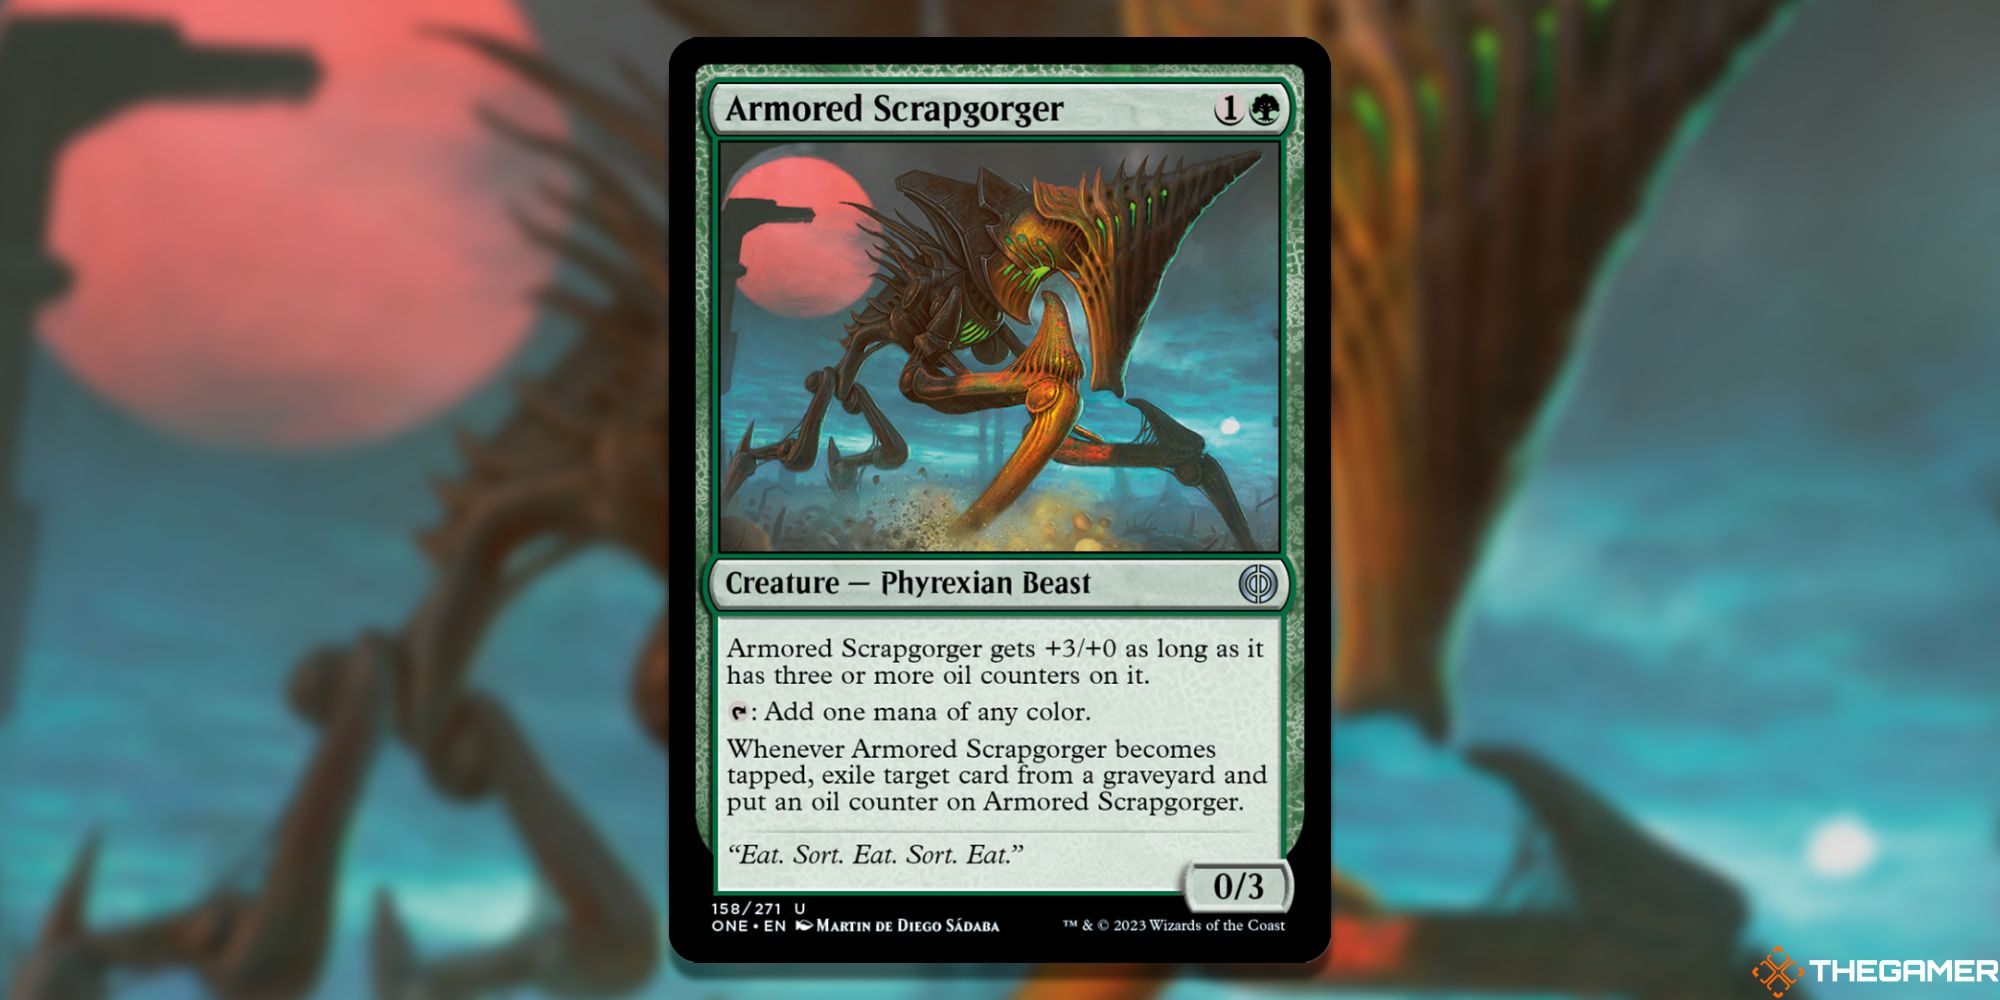 The card Armored Scrapgorger from Magic: The Gathering.